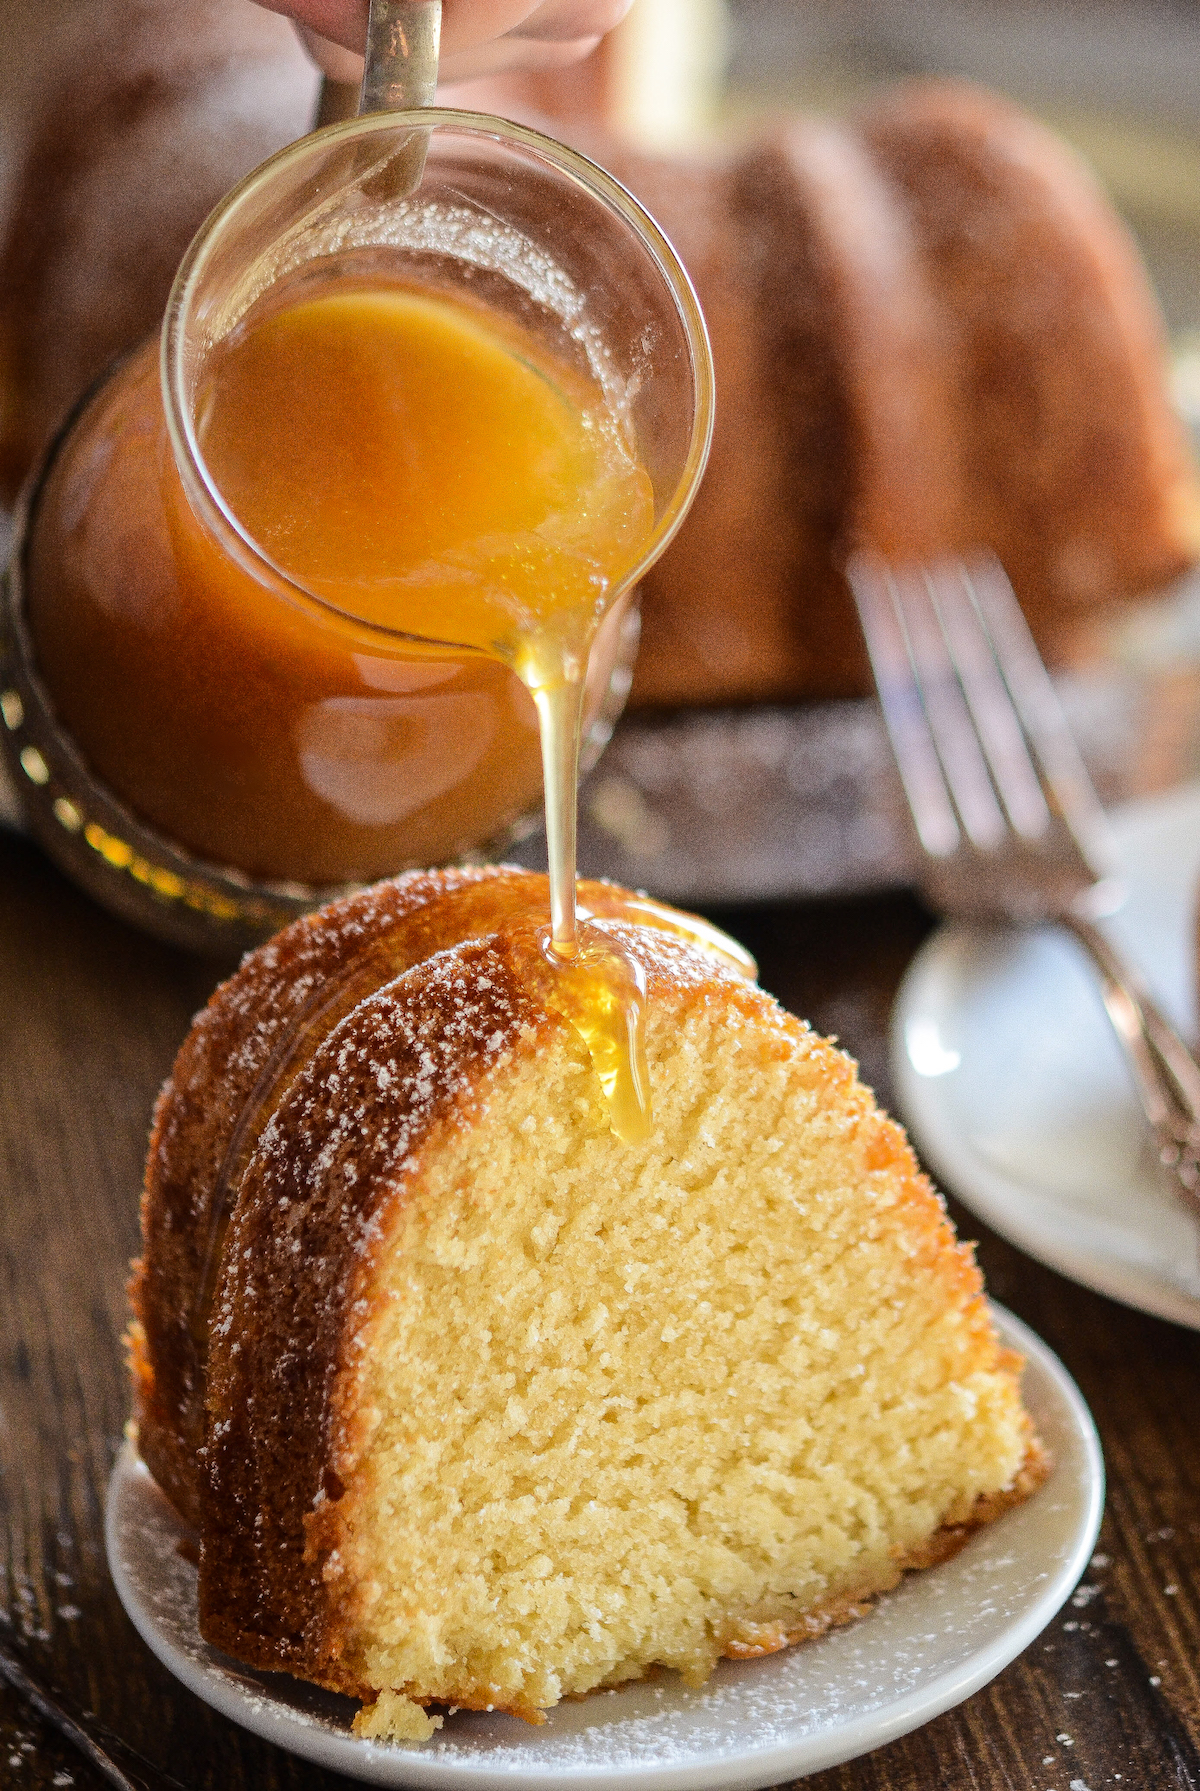 Sweet and dense almond pound cake with a warm brown sugar amaretto sauce being poured on top.